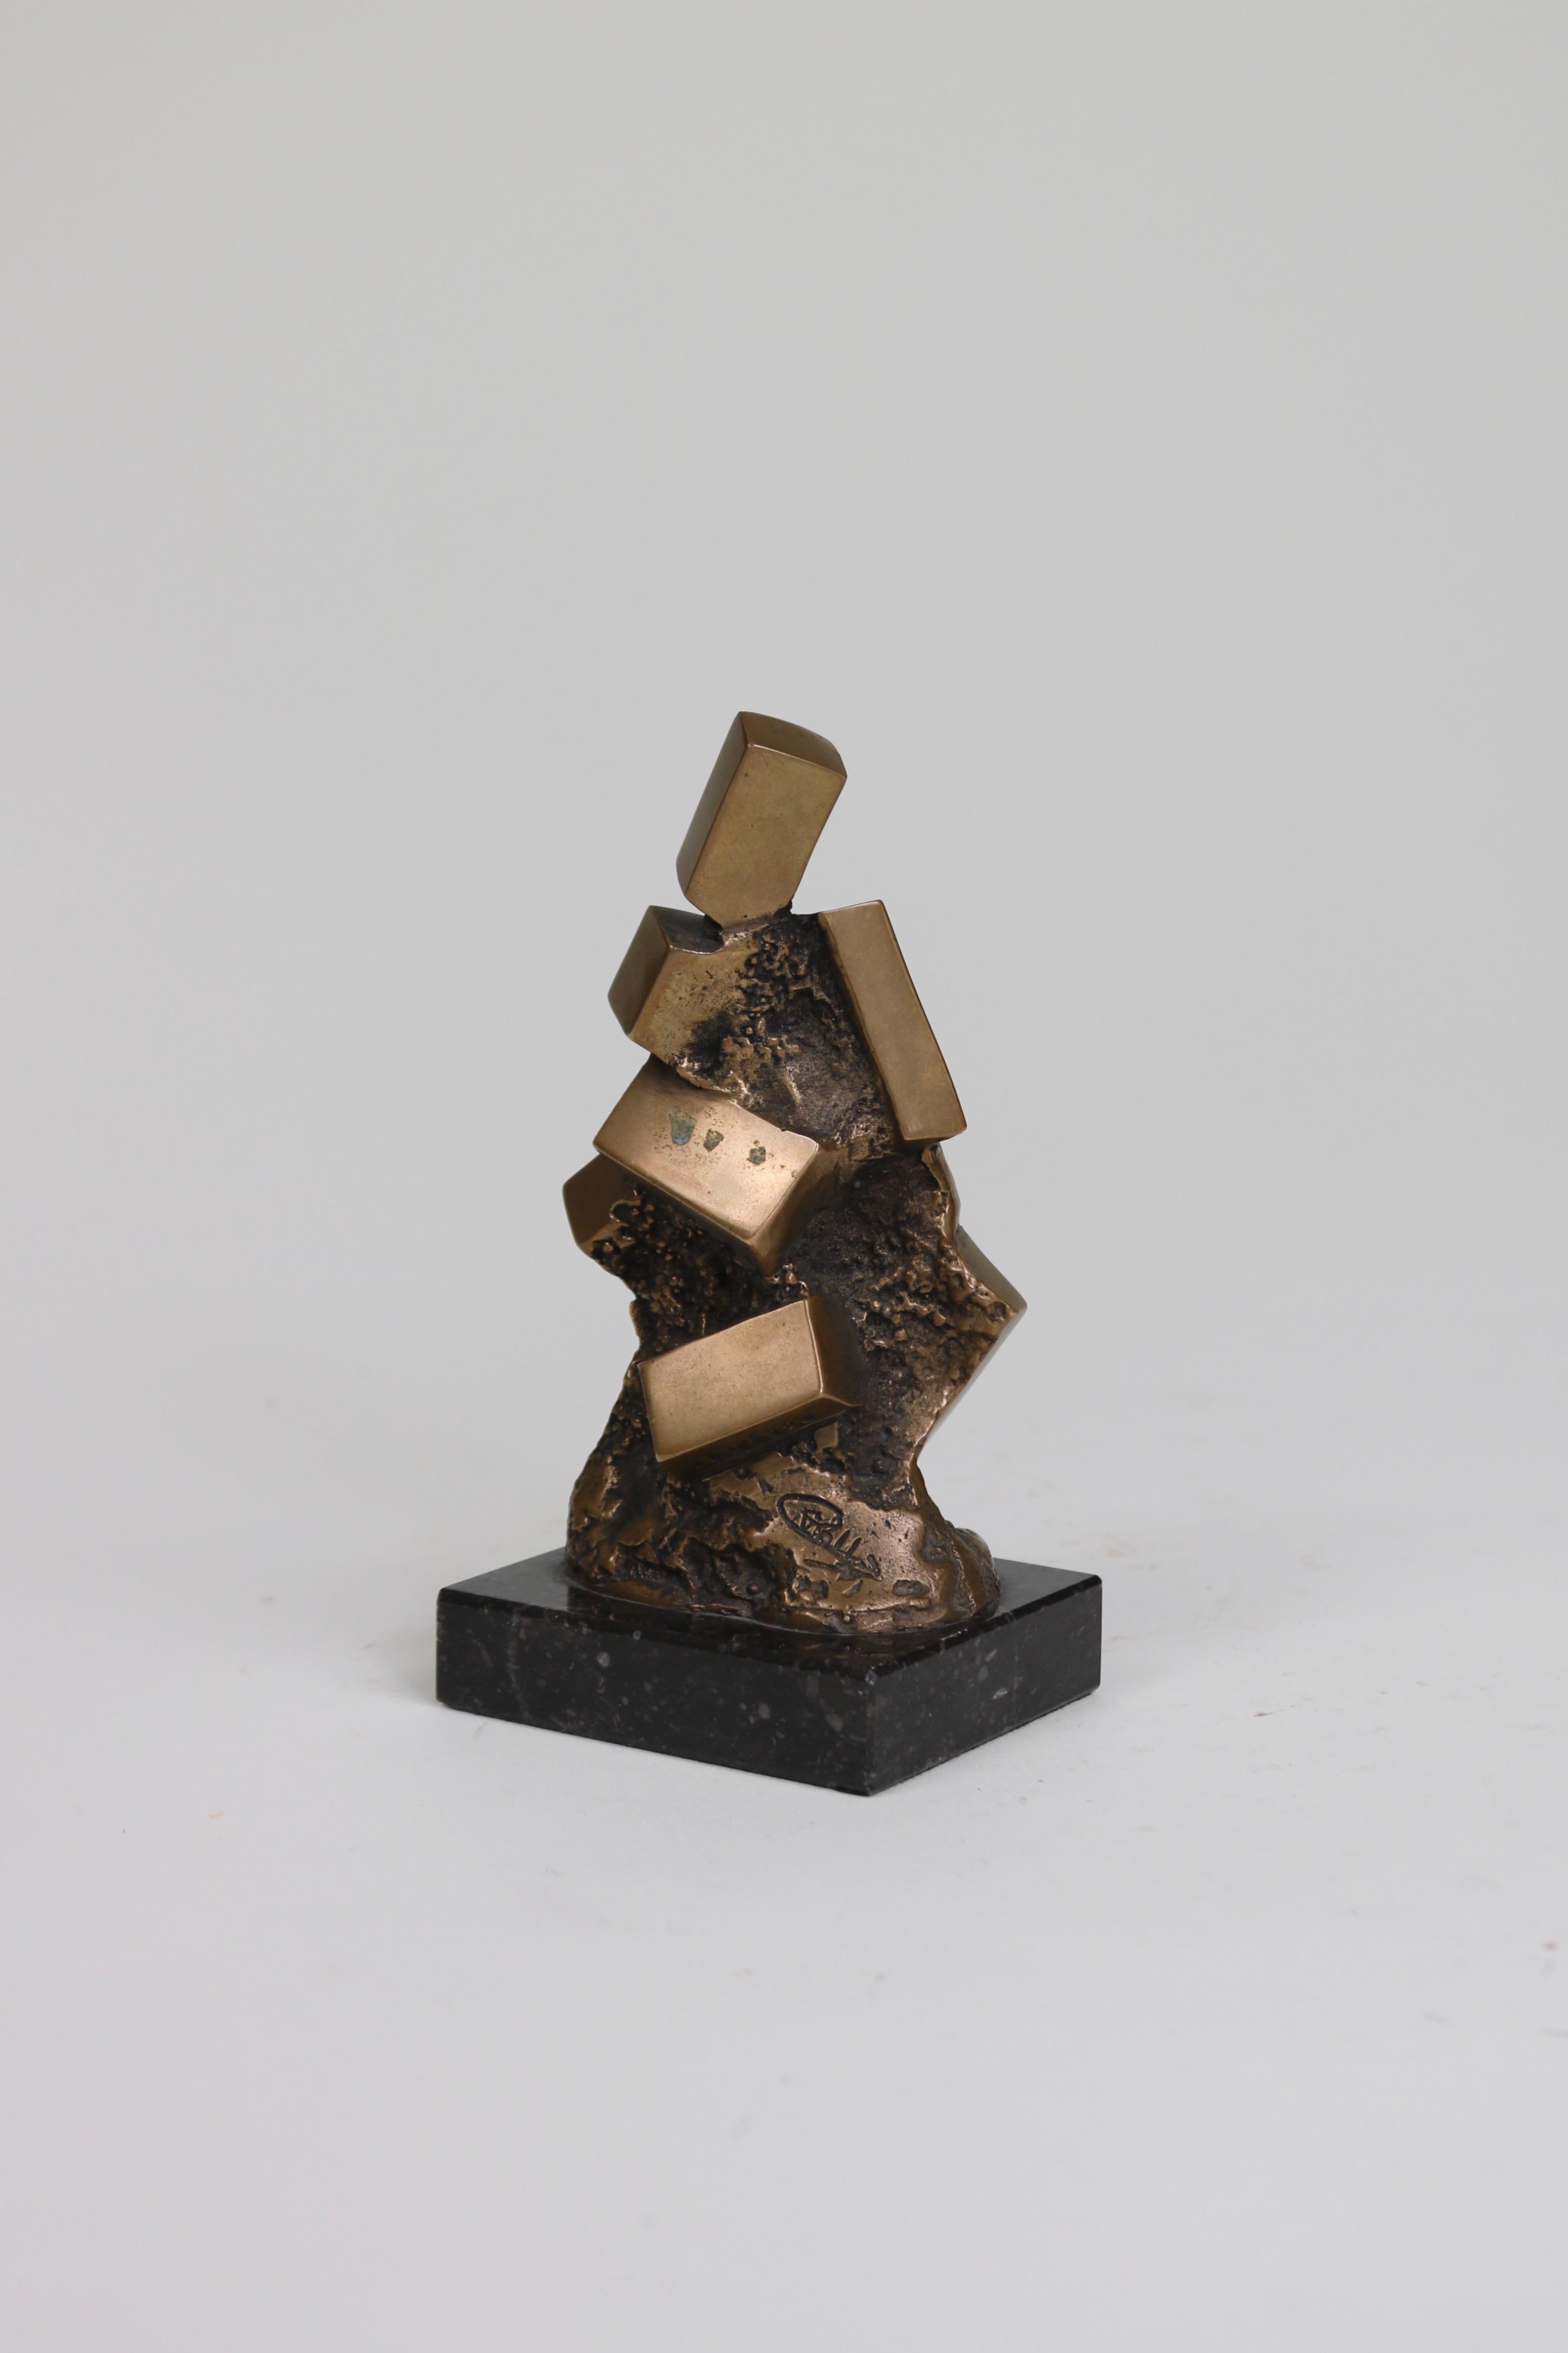 A modernist bronze sculpture mounted on a granite base. Made of bronze blocks melted into a mottled core.

Signed by the artist, but the maker is unknown.

Measures: H 16cm
W 8cm